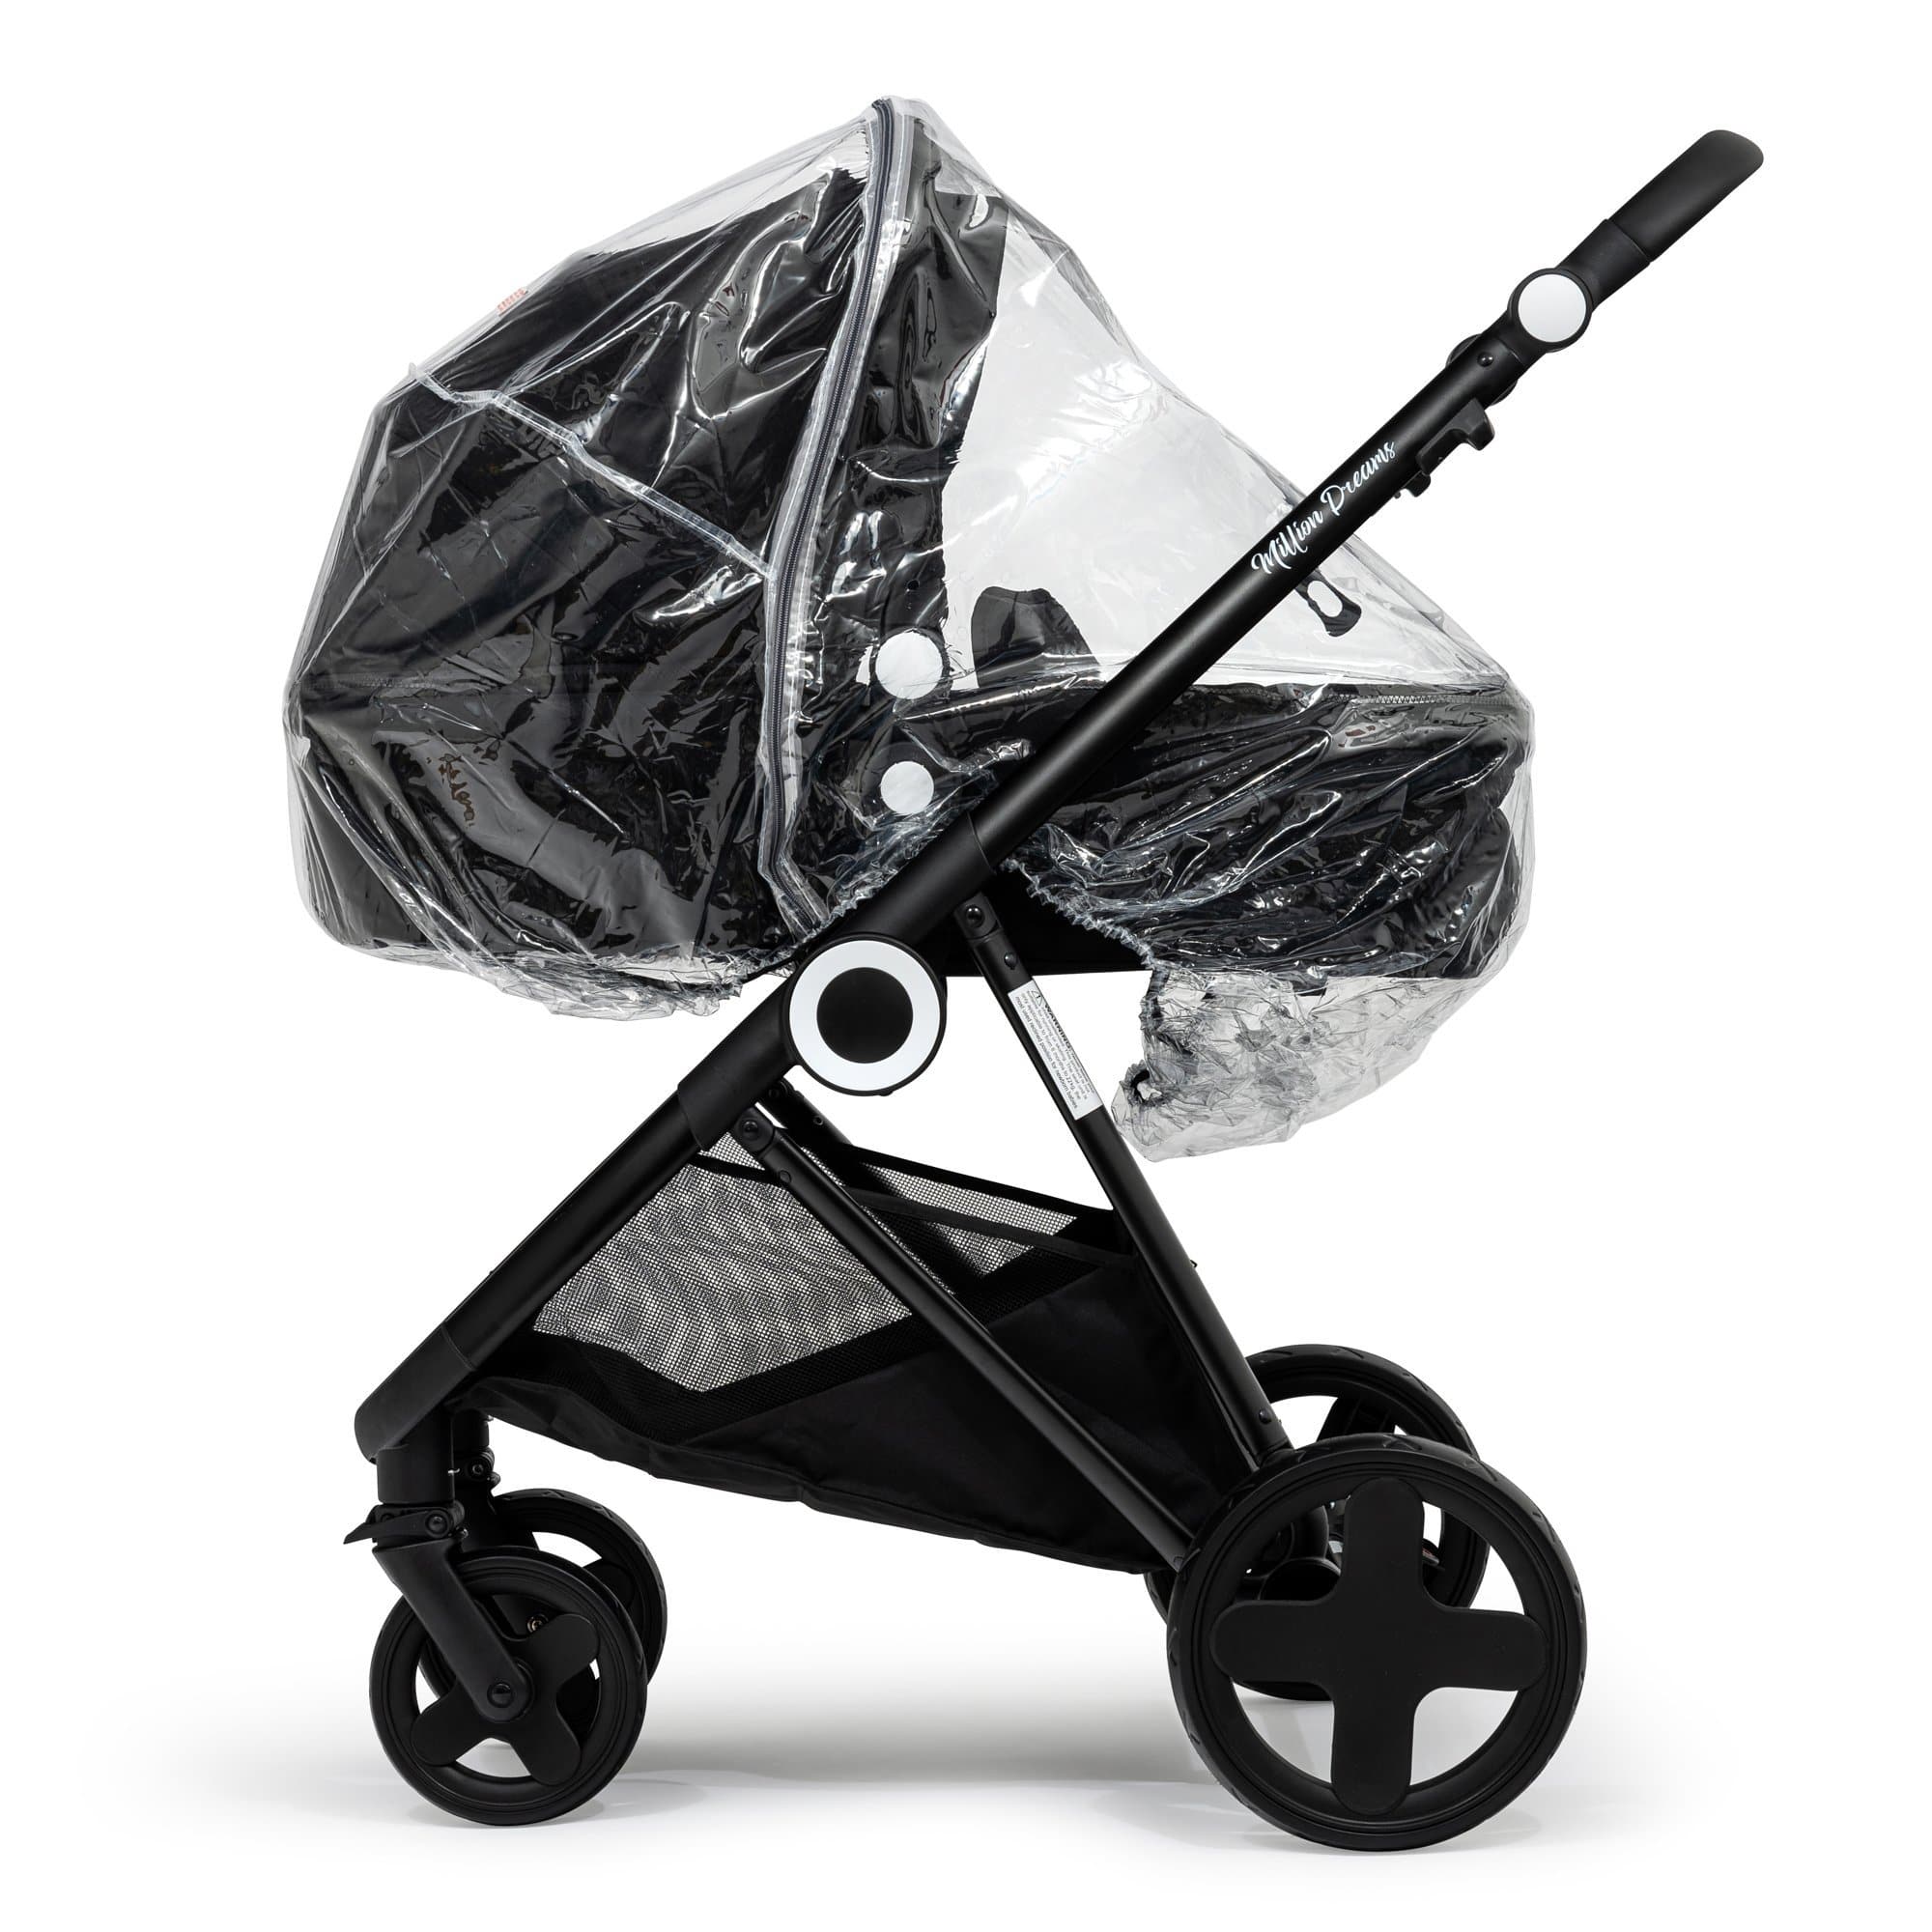 2 in 1 Rain Cover Compatible with Out 'n' About - Fits All Models - For Your Little One